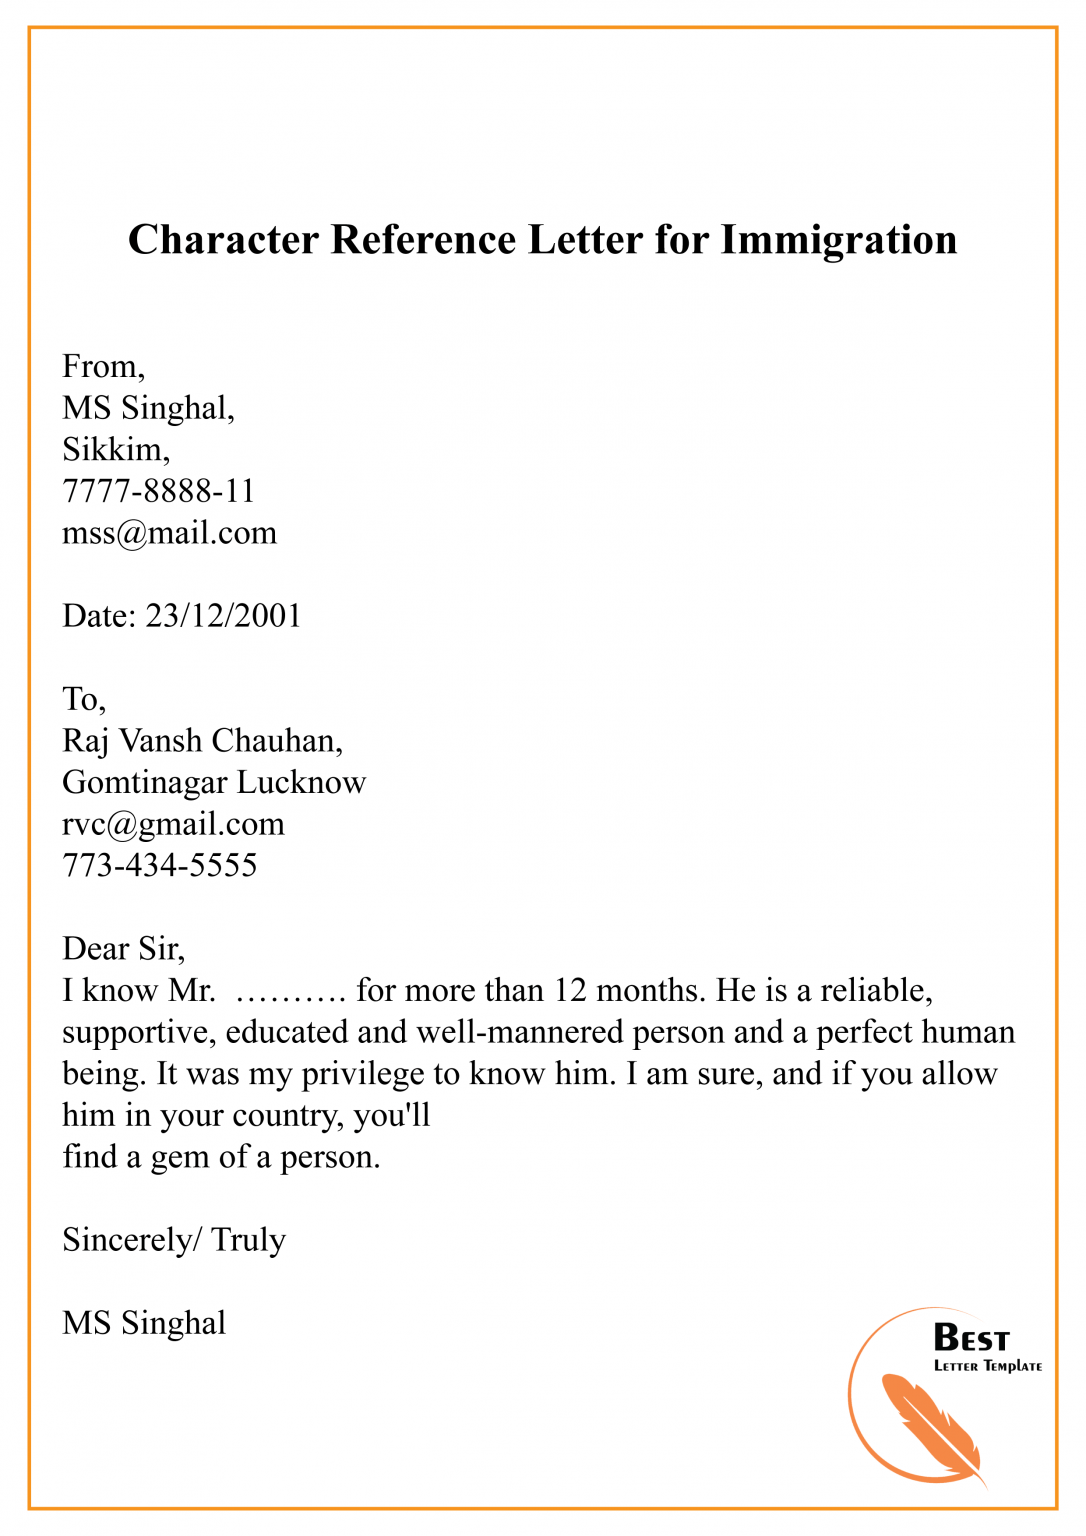 Character Reference Letter For Immigration Sample And Example 0095